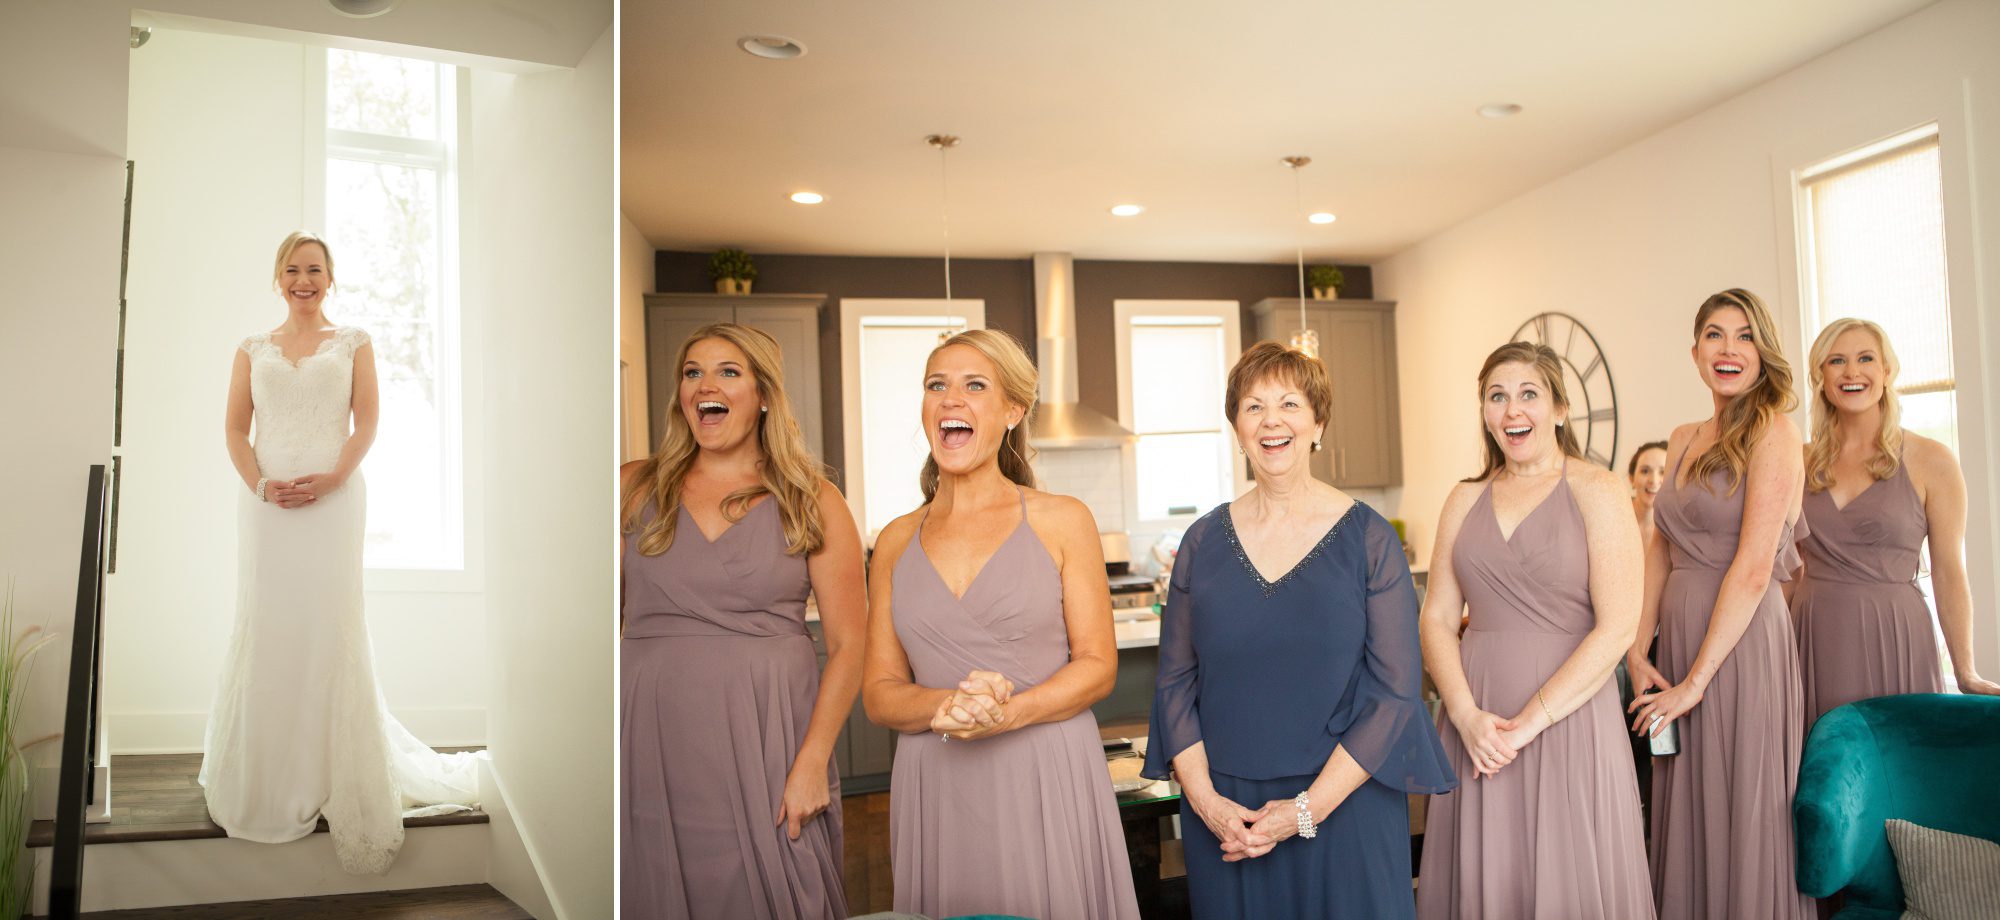 Bride gets hair and makeup, bridesmaids get dressed at nearby AirBNB before wedding photography at Musician's Hall of Fame Nashville